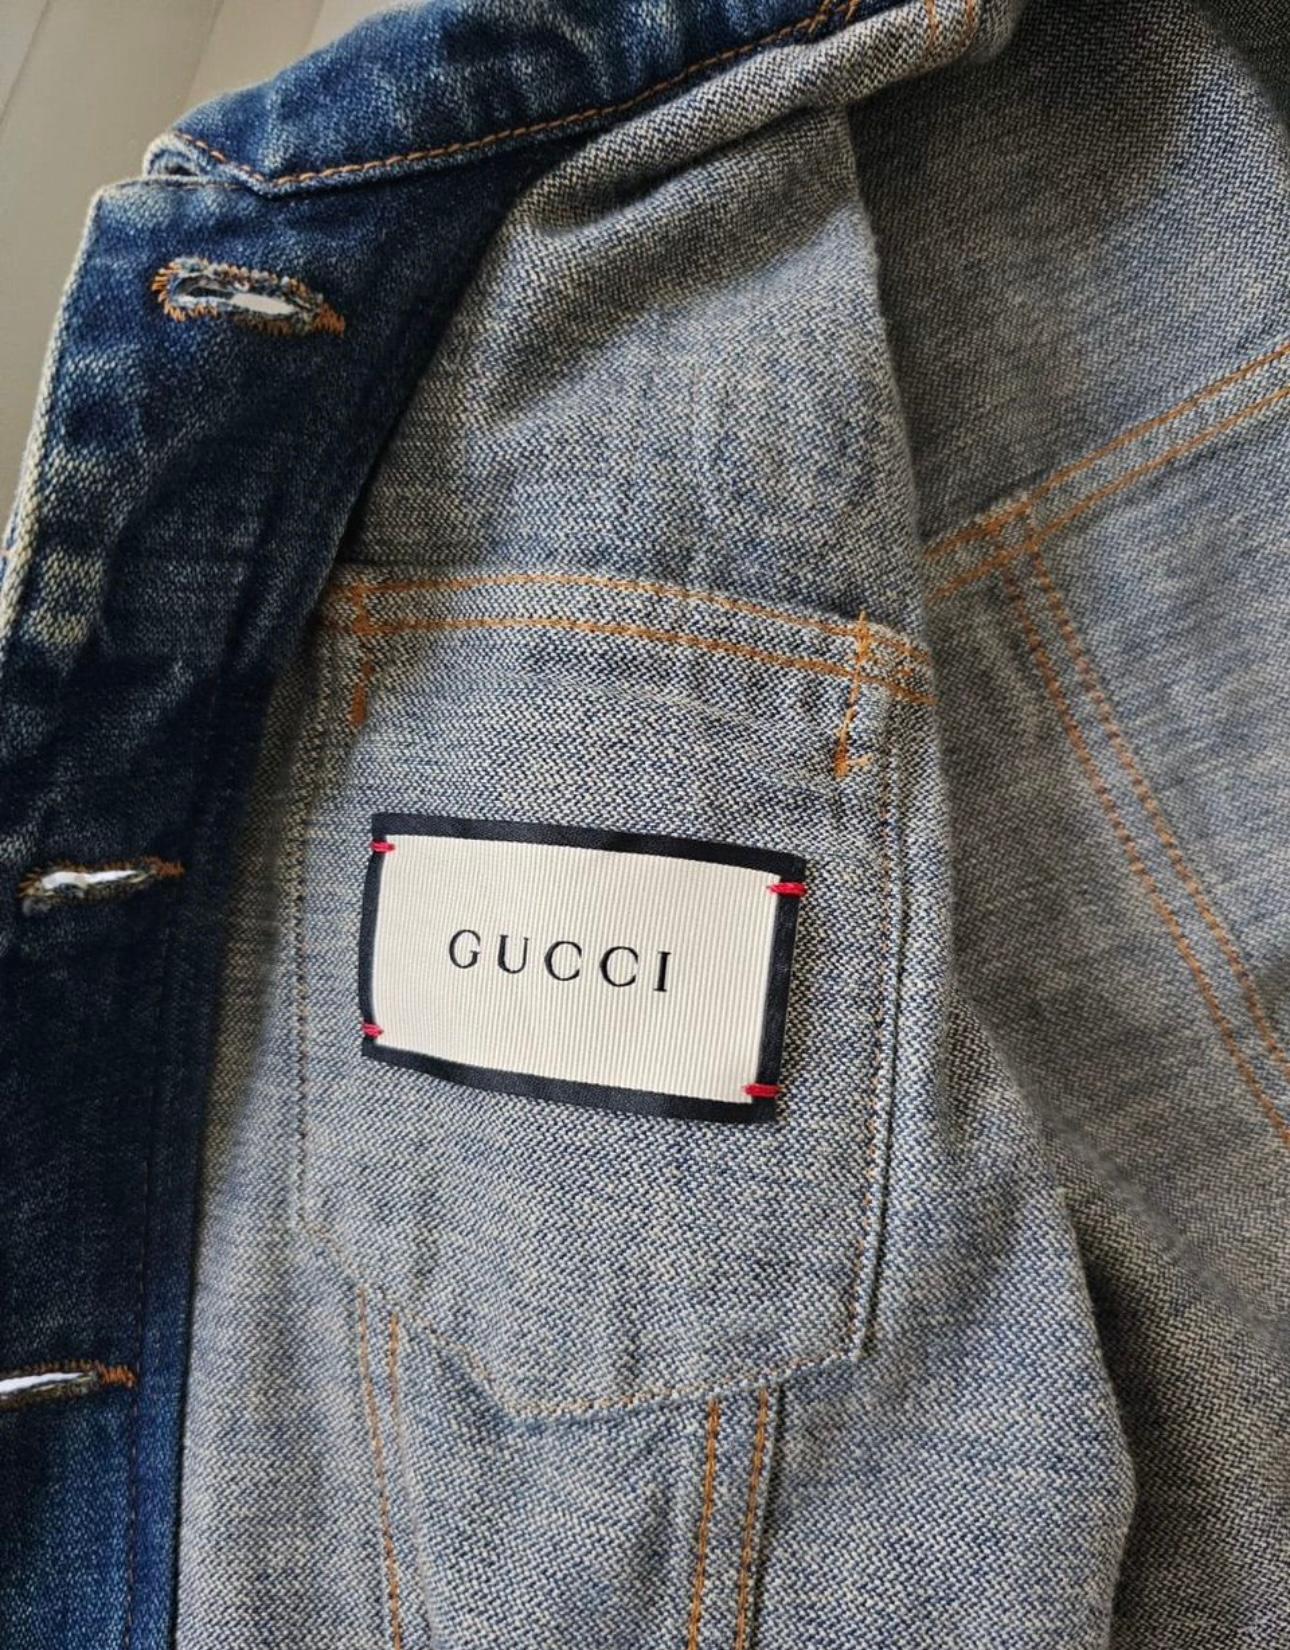 Gucci 3K$ Hollywood Slogan and Rabbit Embroidery Jacket For Sale 7